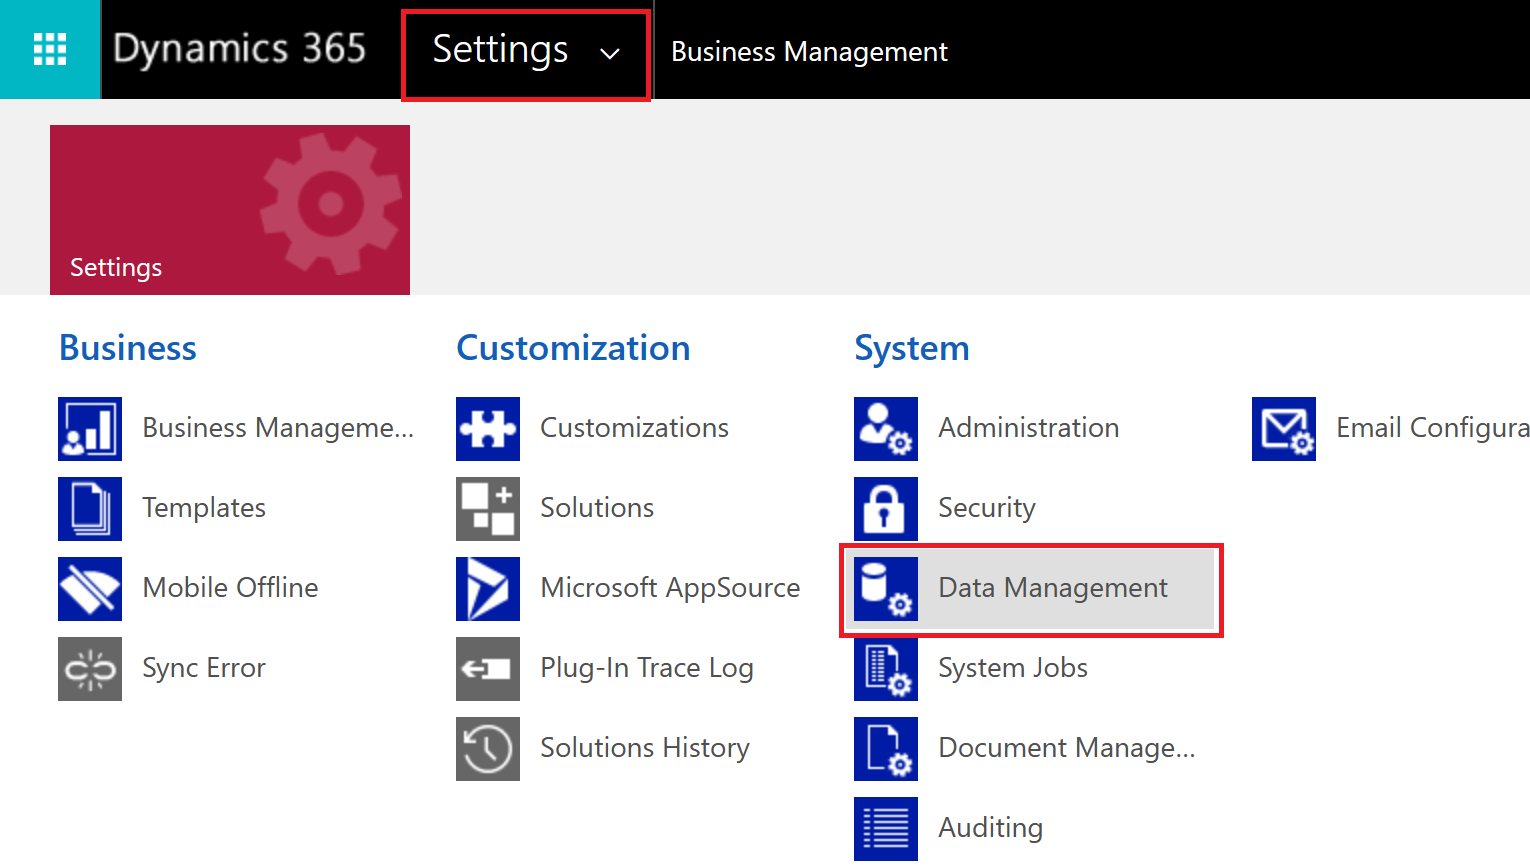 Image shows Dynamics 365 settings, data management location